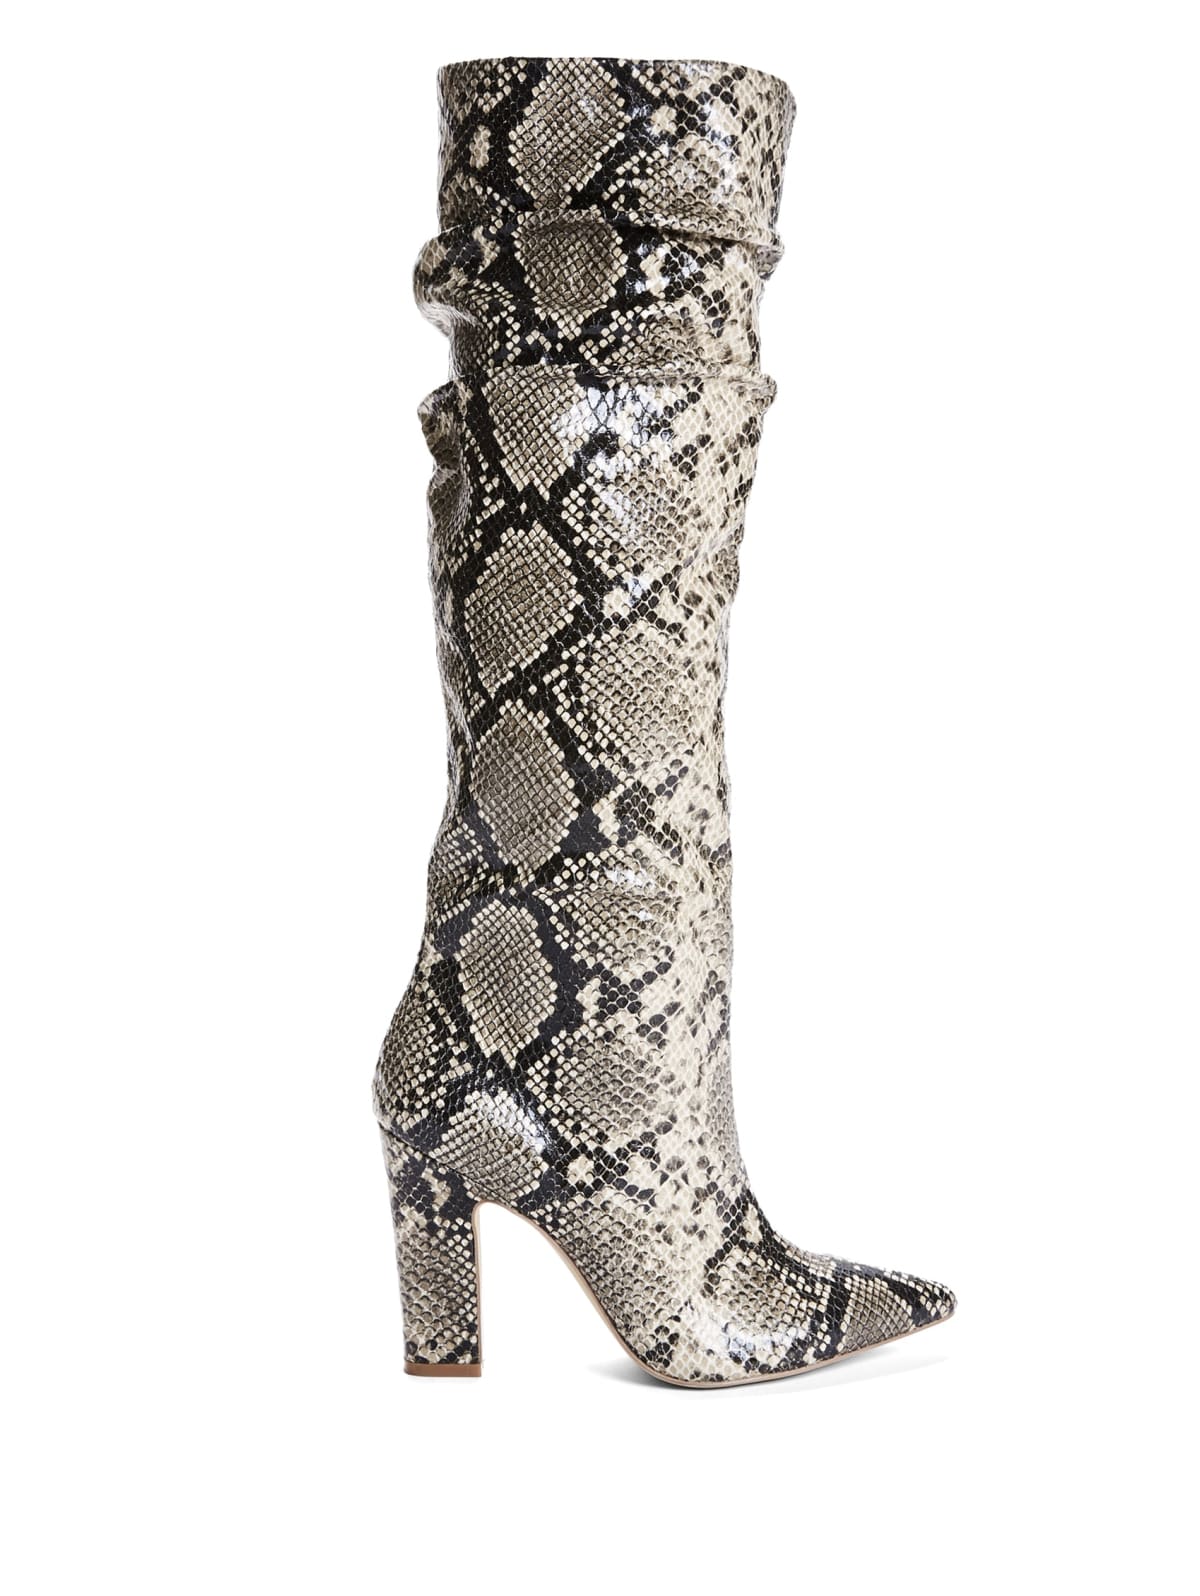 guess snakeskin boots